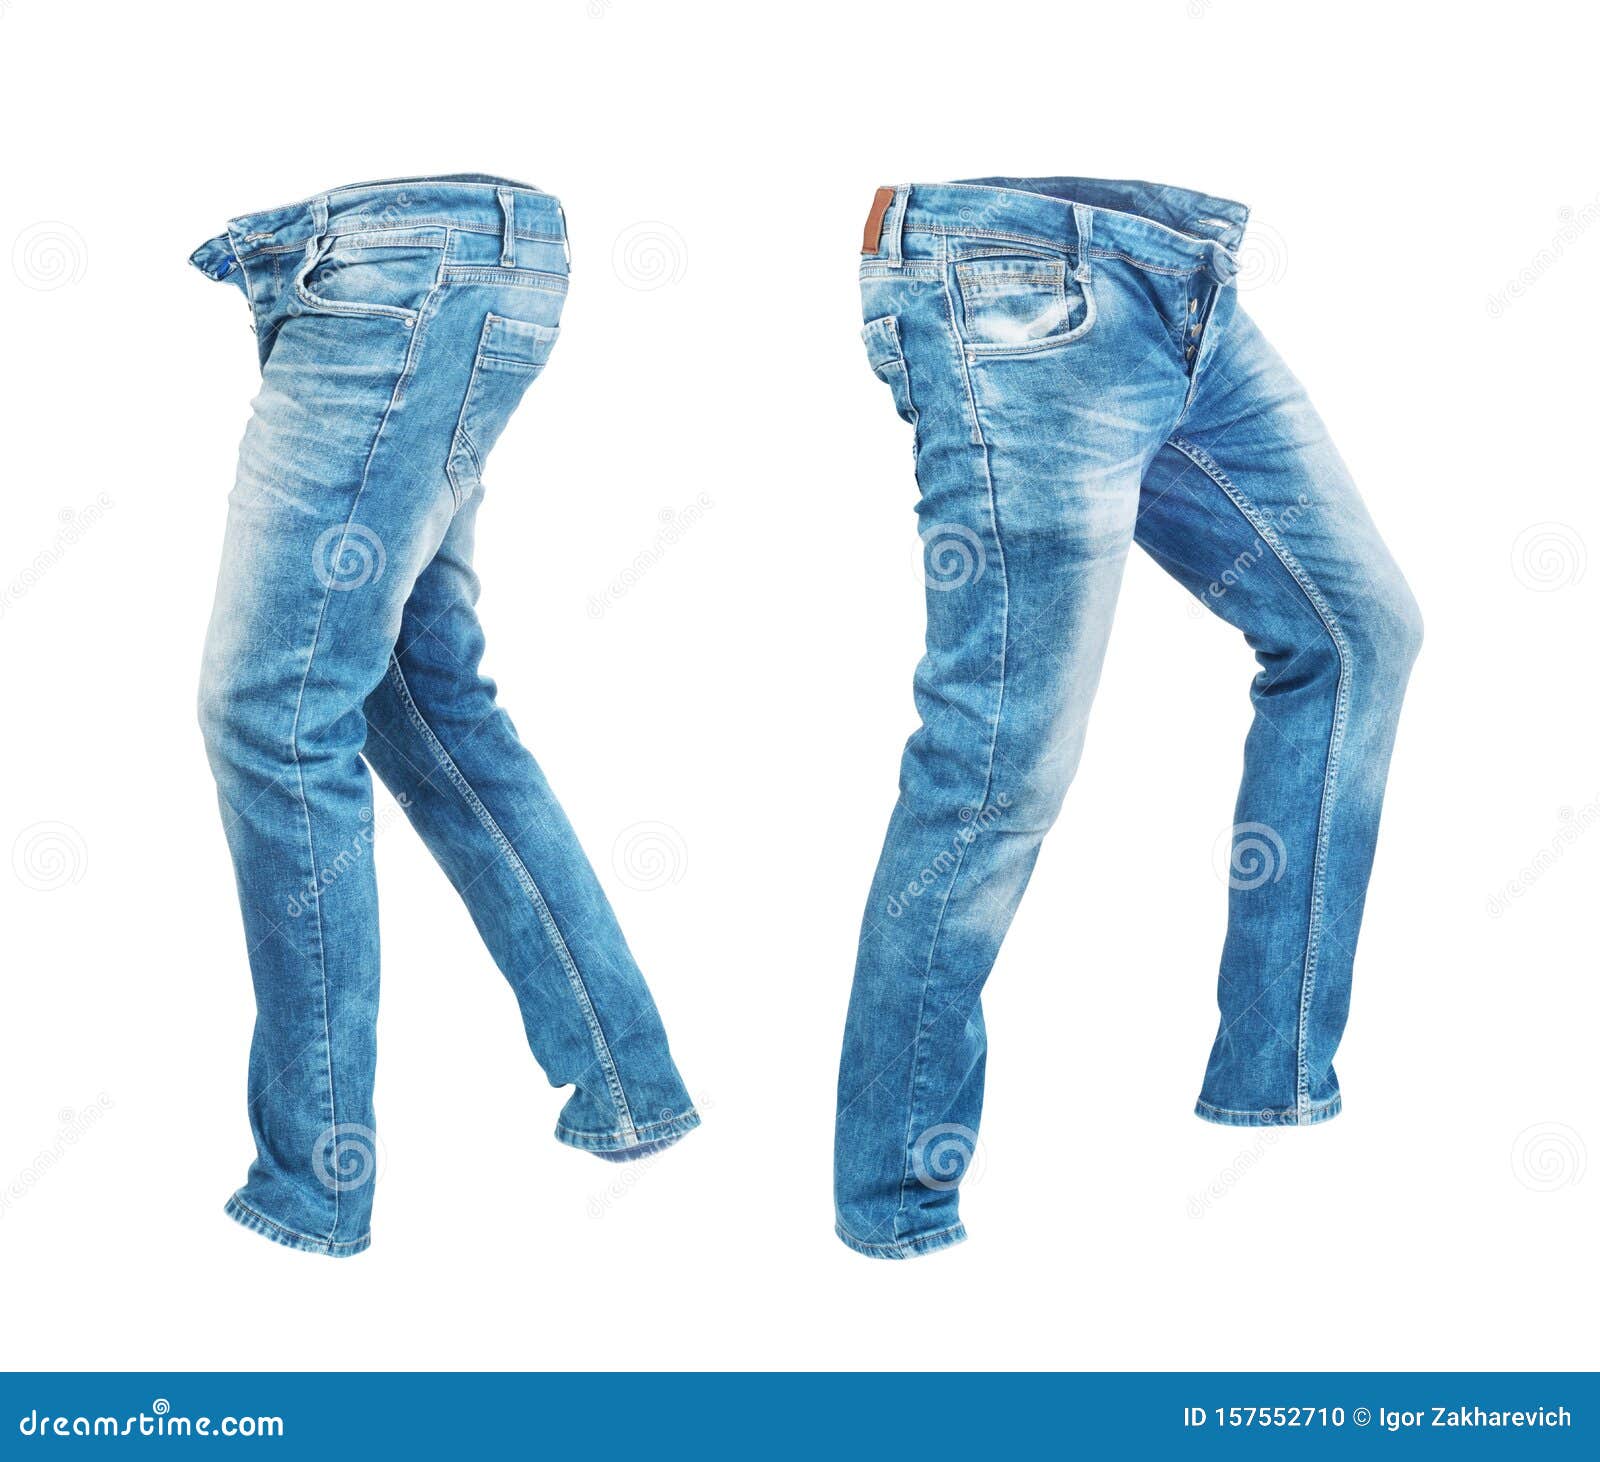 Blank Jeans Pants Leftside And Rightside Stock Photo - Image of idea ...